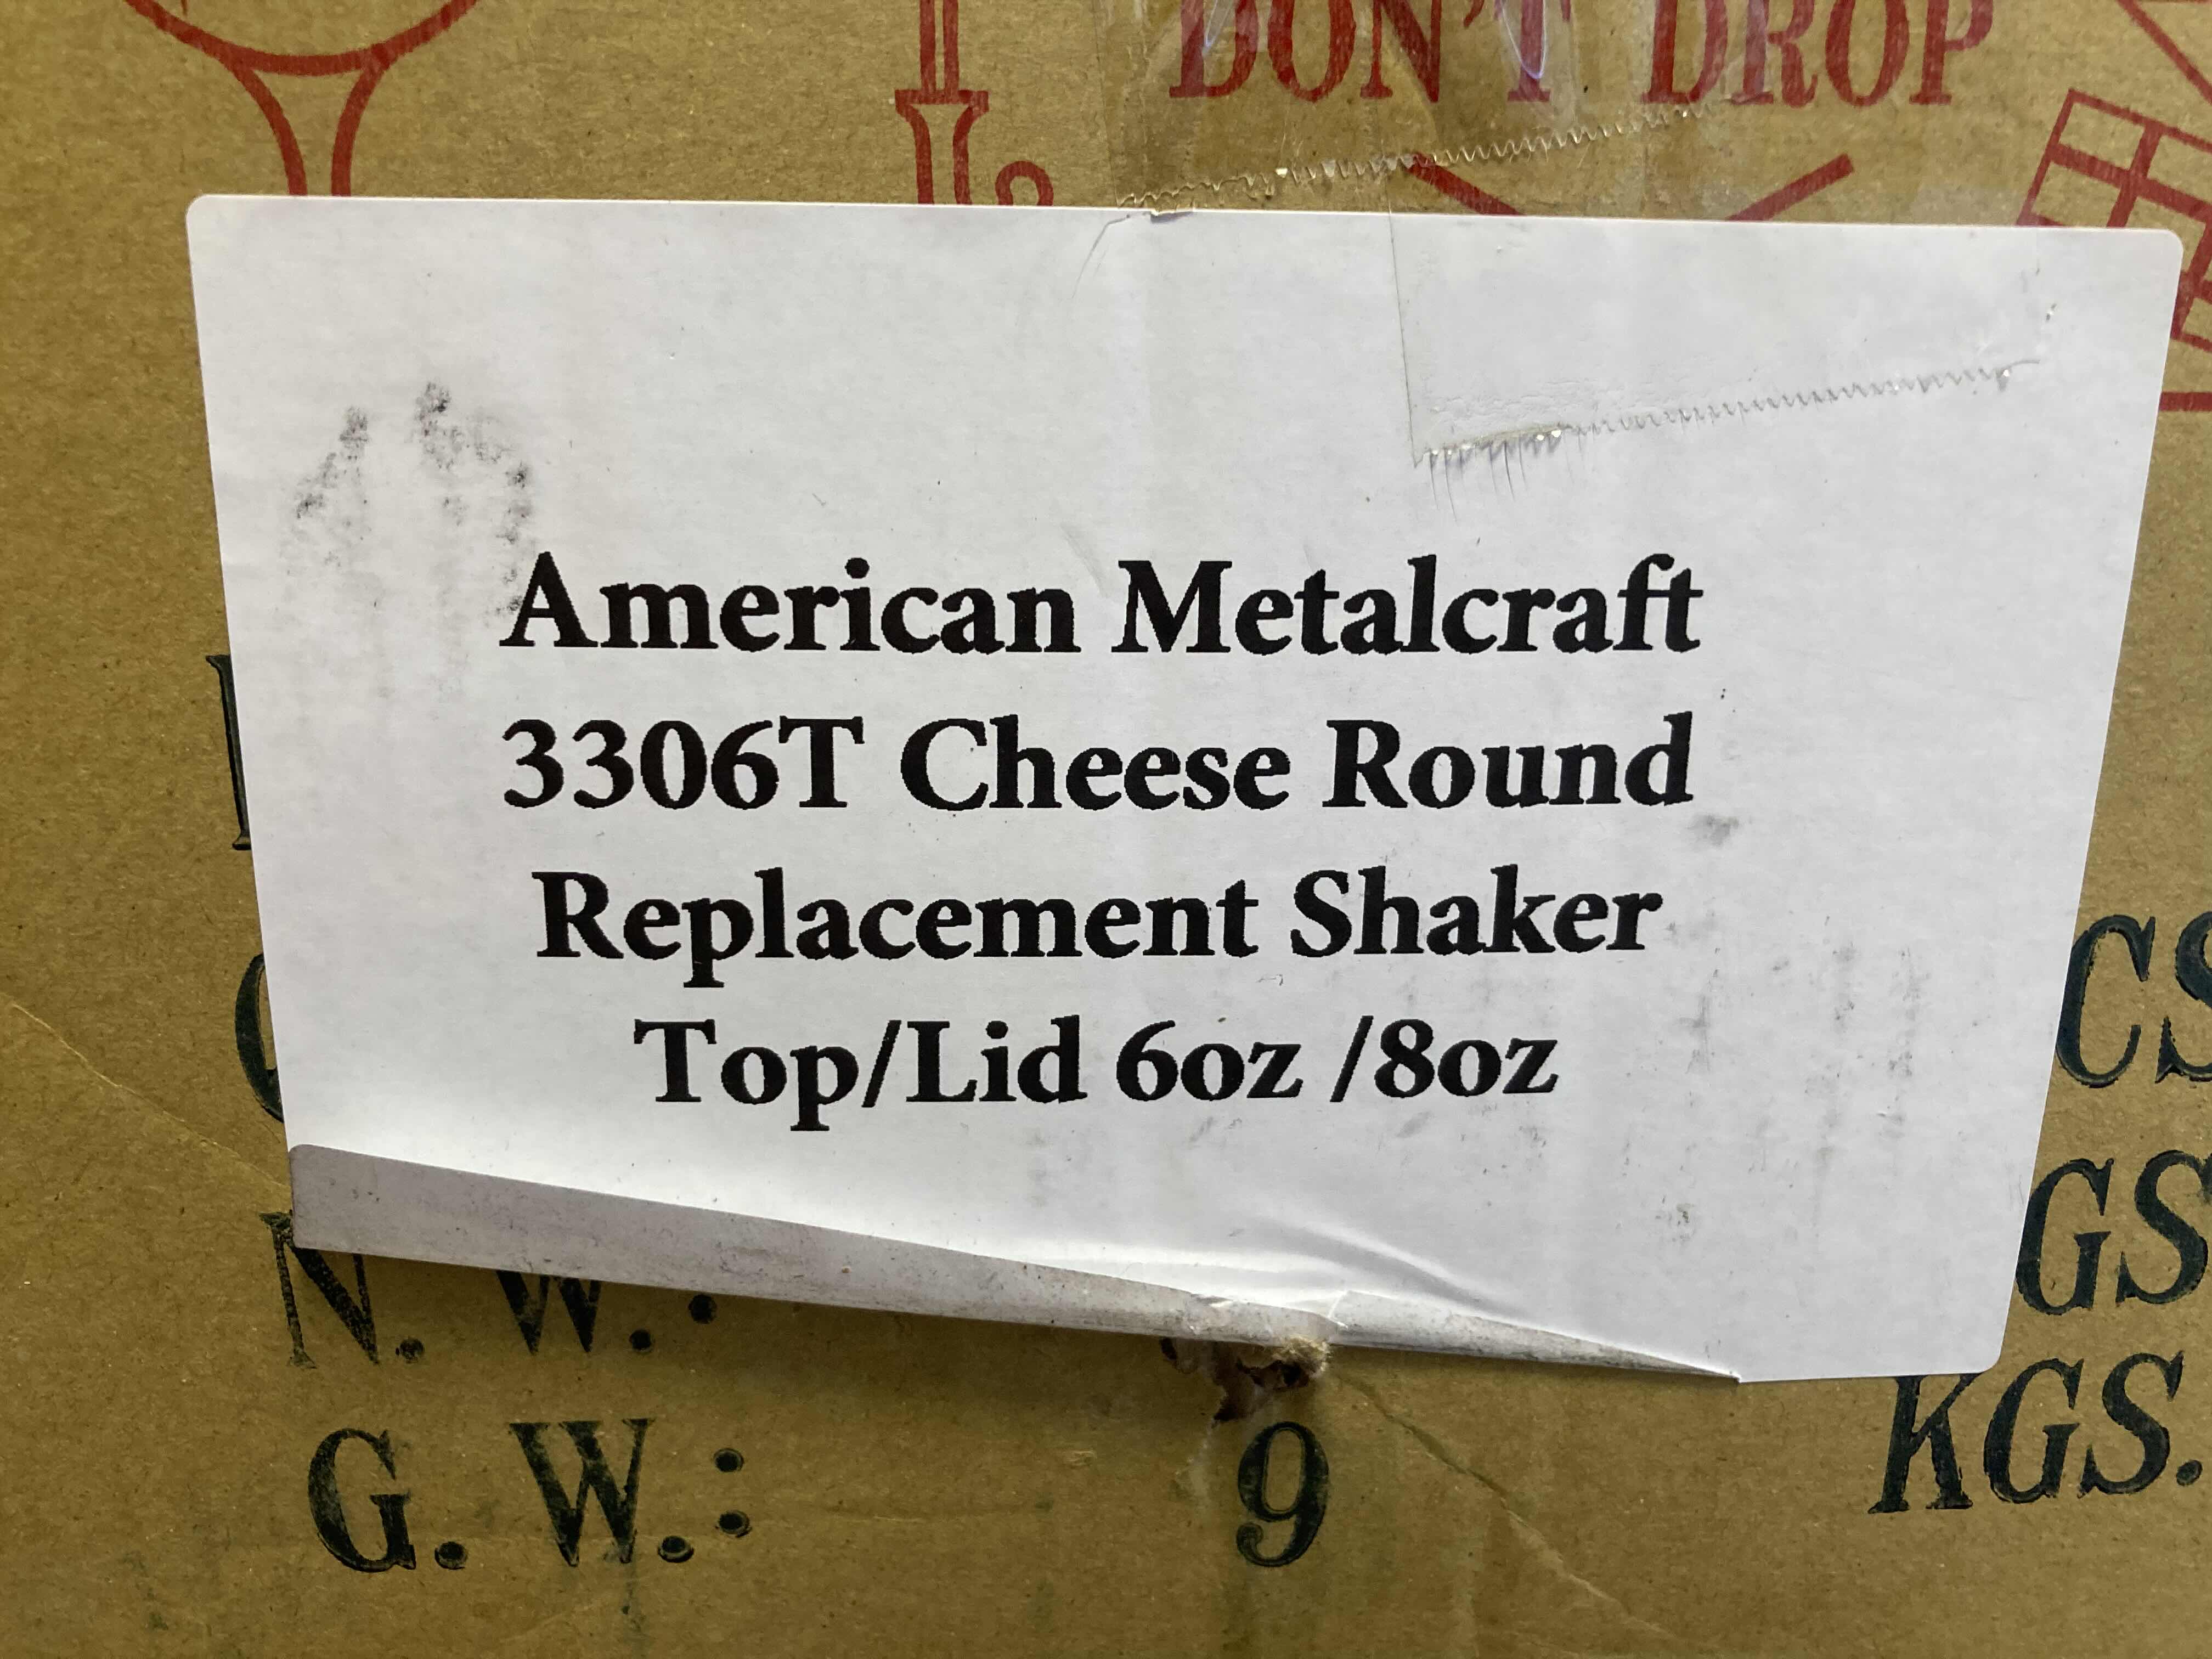 Photo 2 of NEW AMERICAN METAL CRAFT CHEESE 60Z/8OZ REPLACEMENT
ROUND SHAKER LIDS TOPS
MODEL 3306T (55 12PACKS)